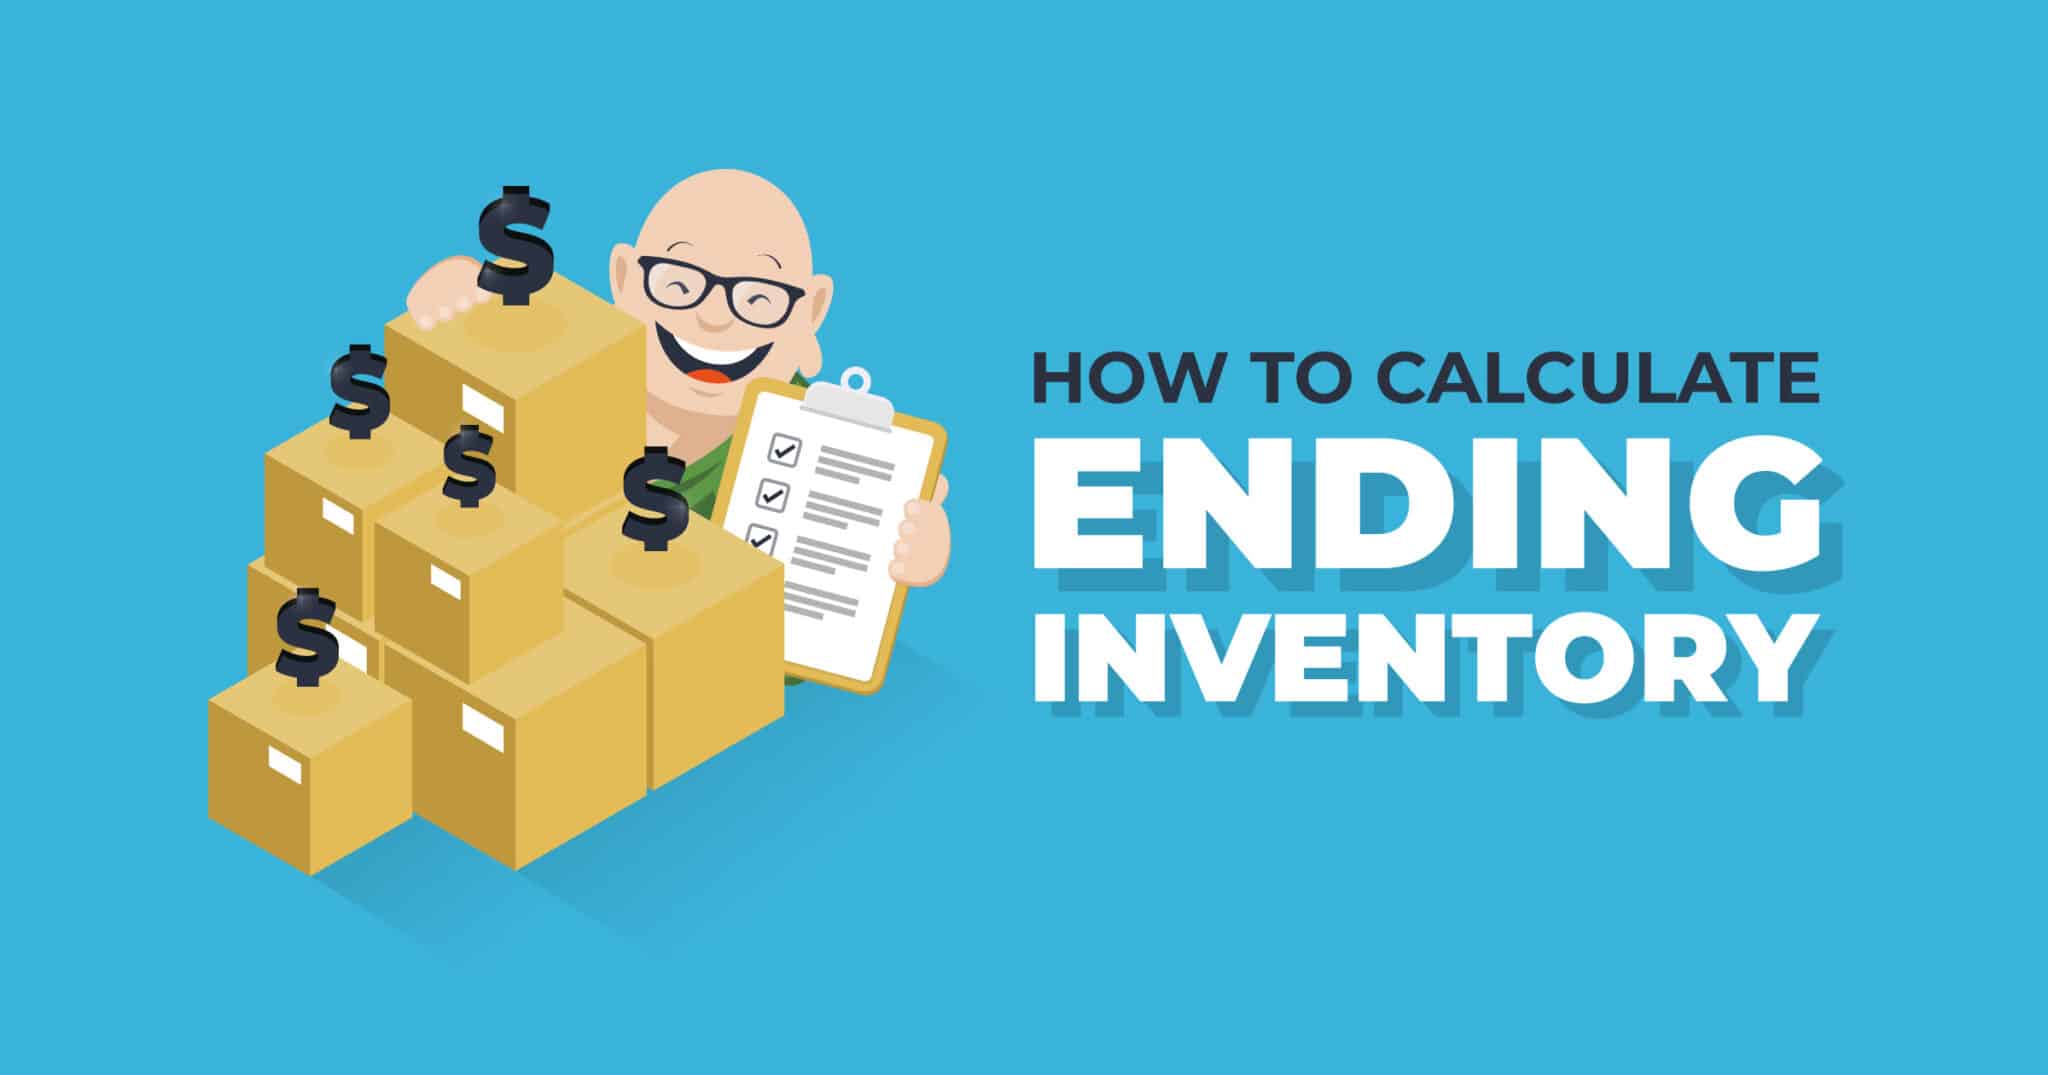 How to Calculate Ending Inventory